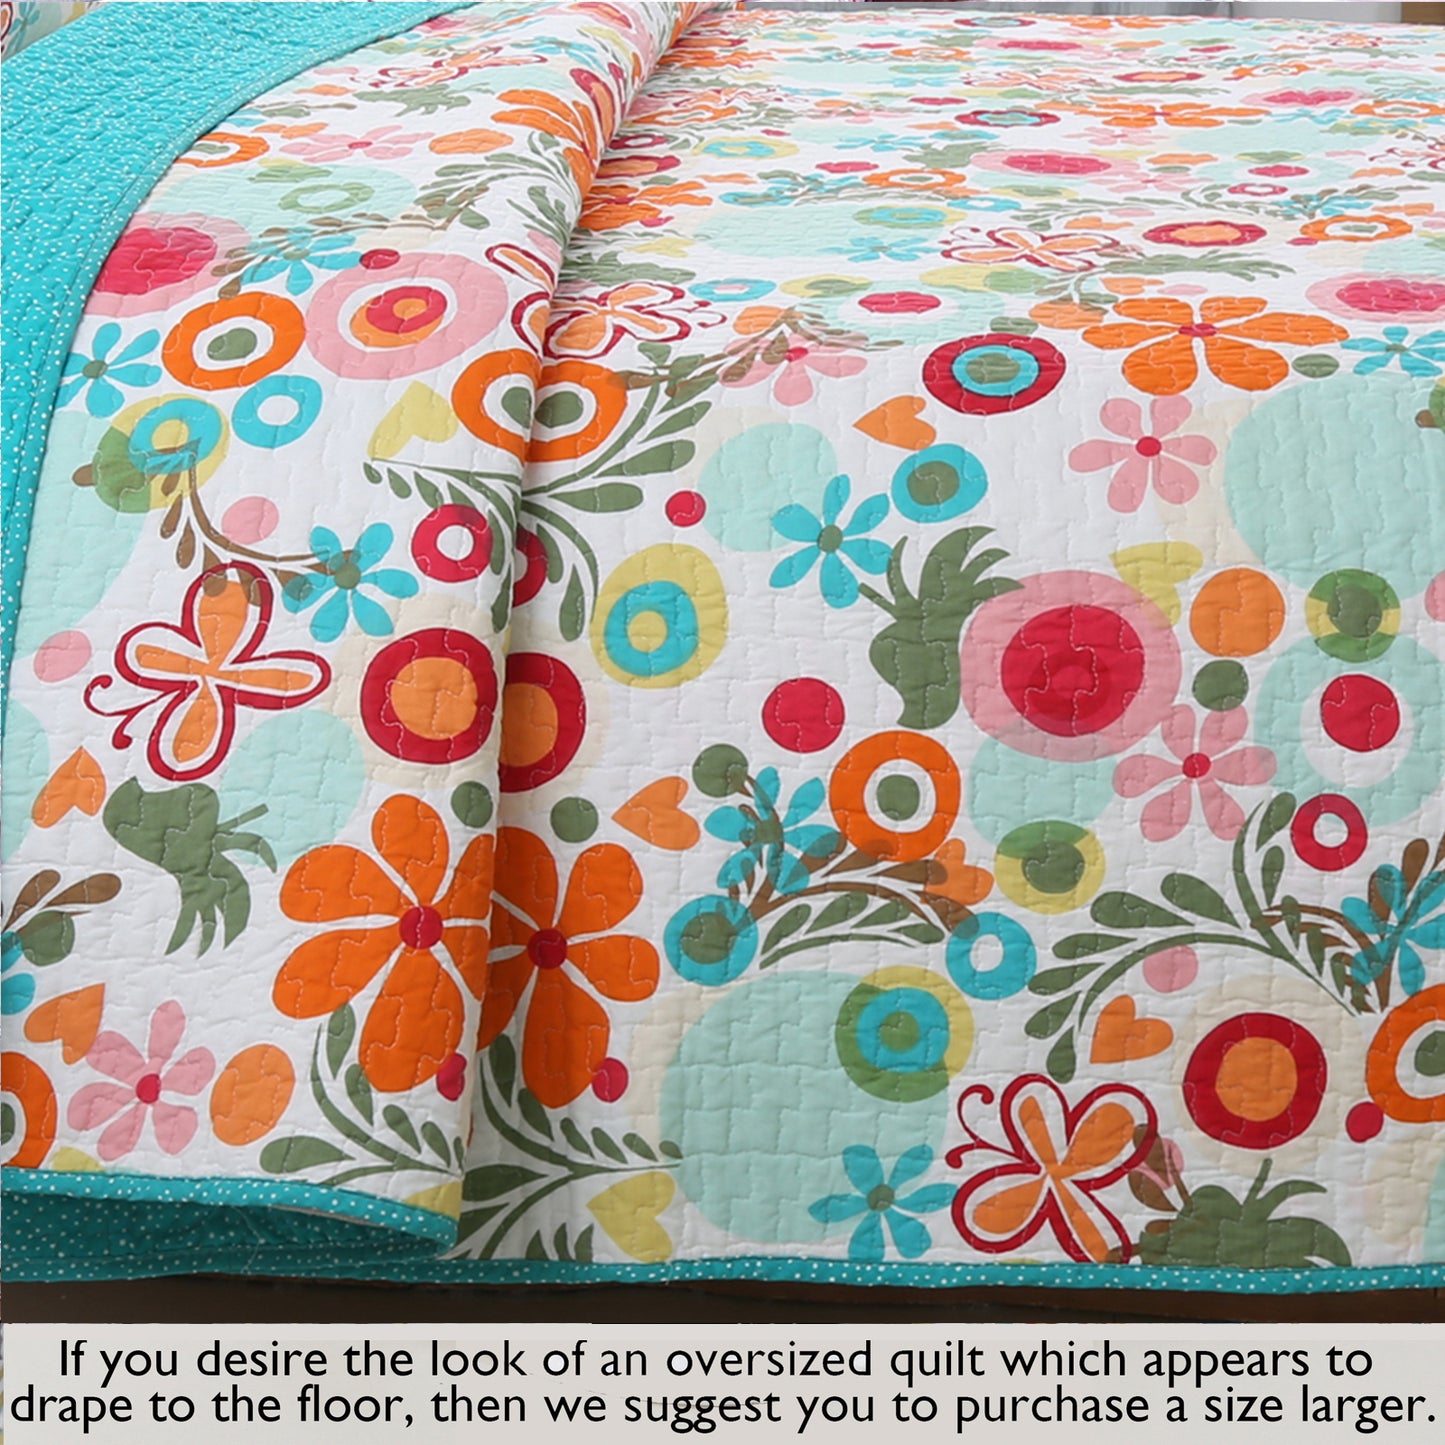 Floral Whimsy Colorful Cotton Reversible Quilt Bedding Set